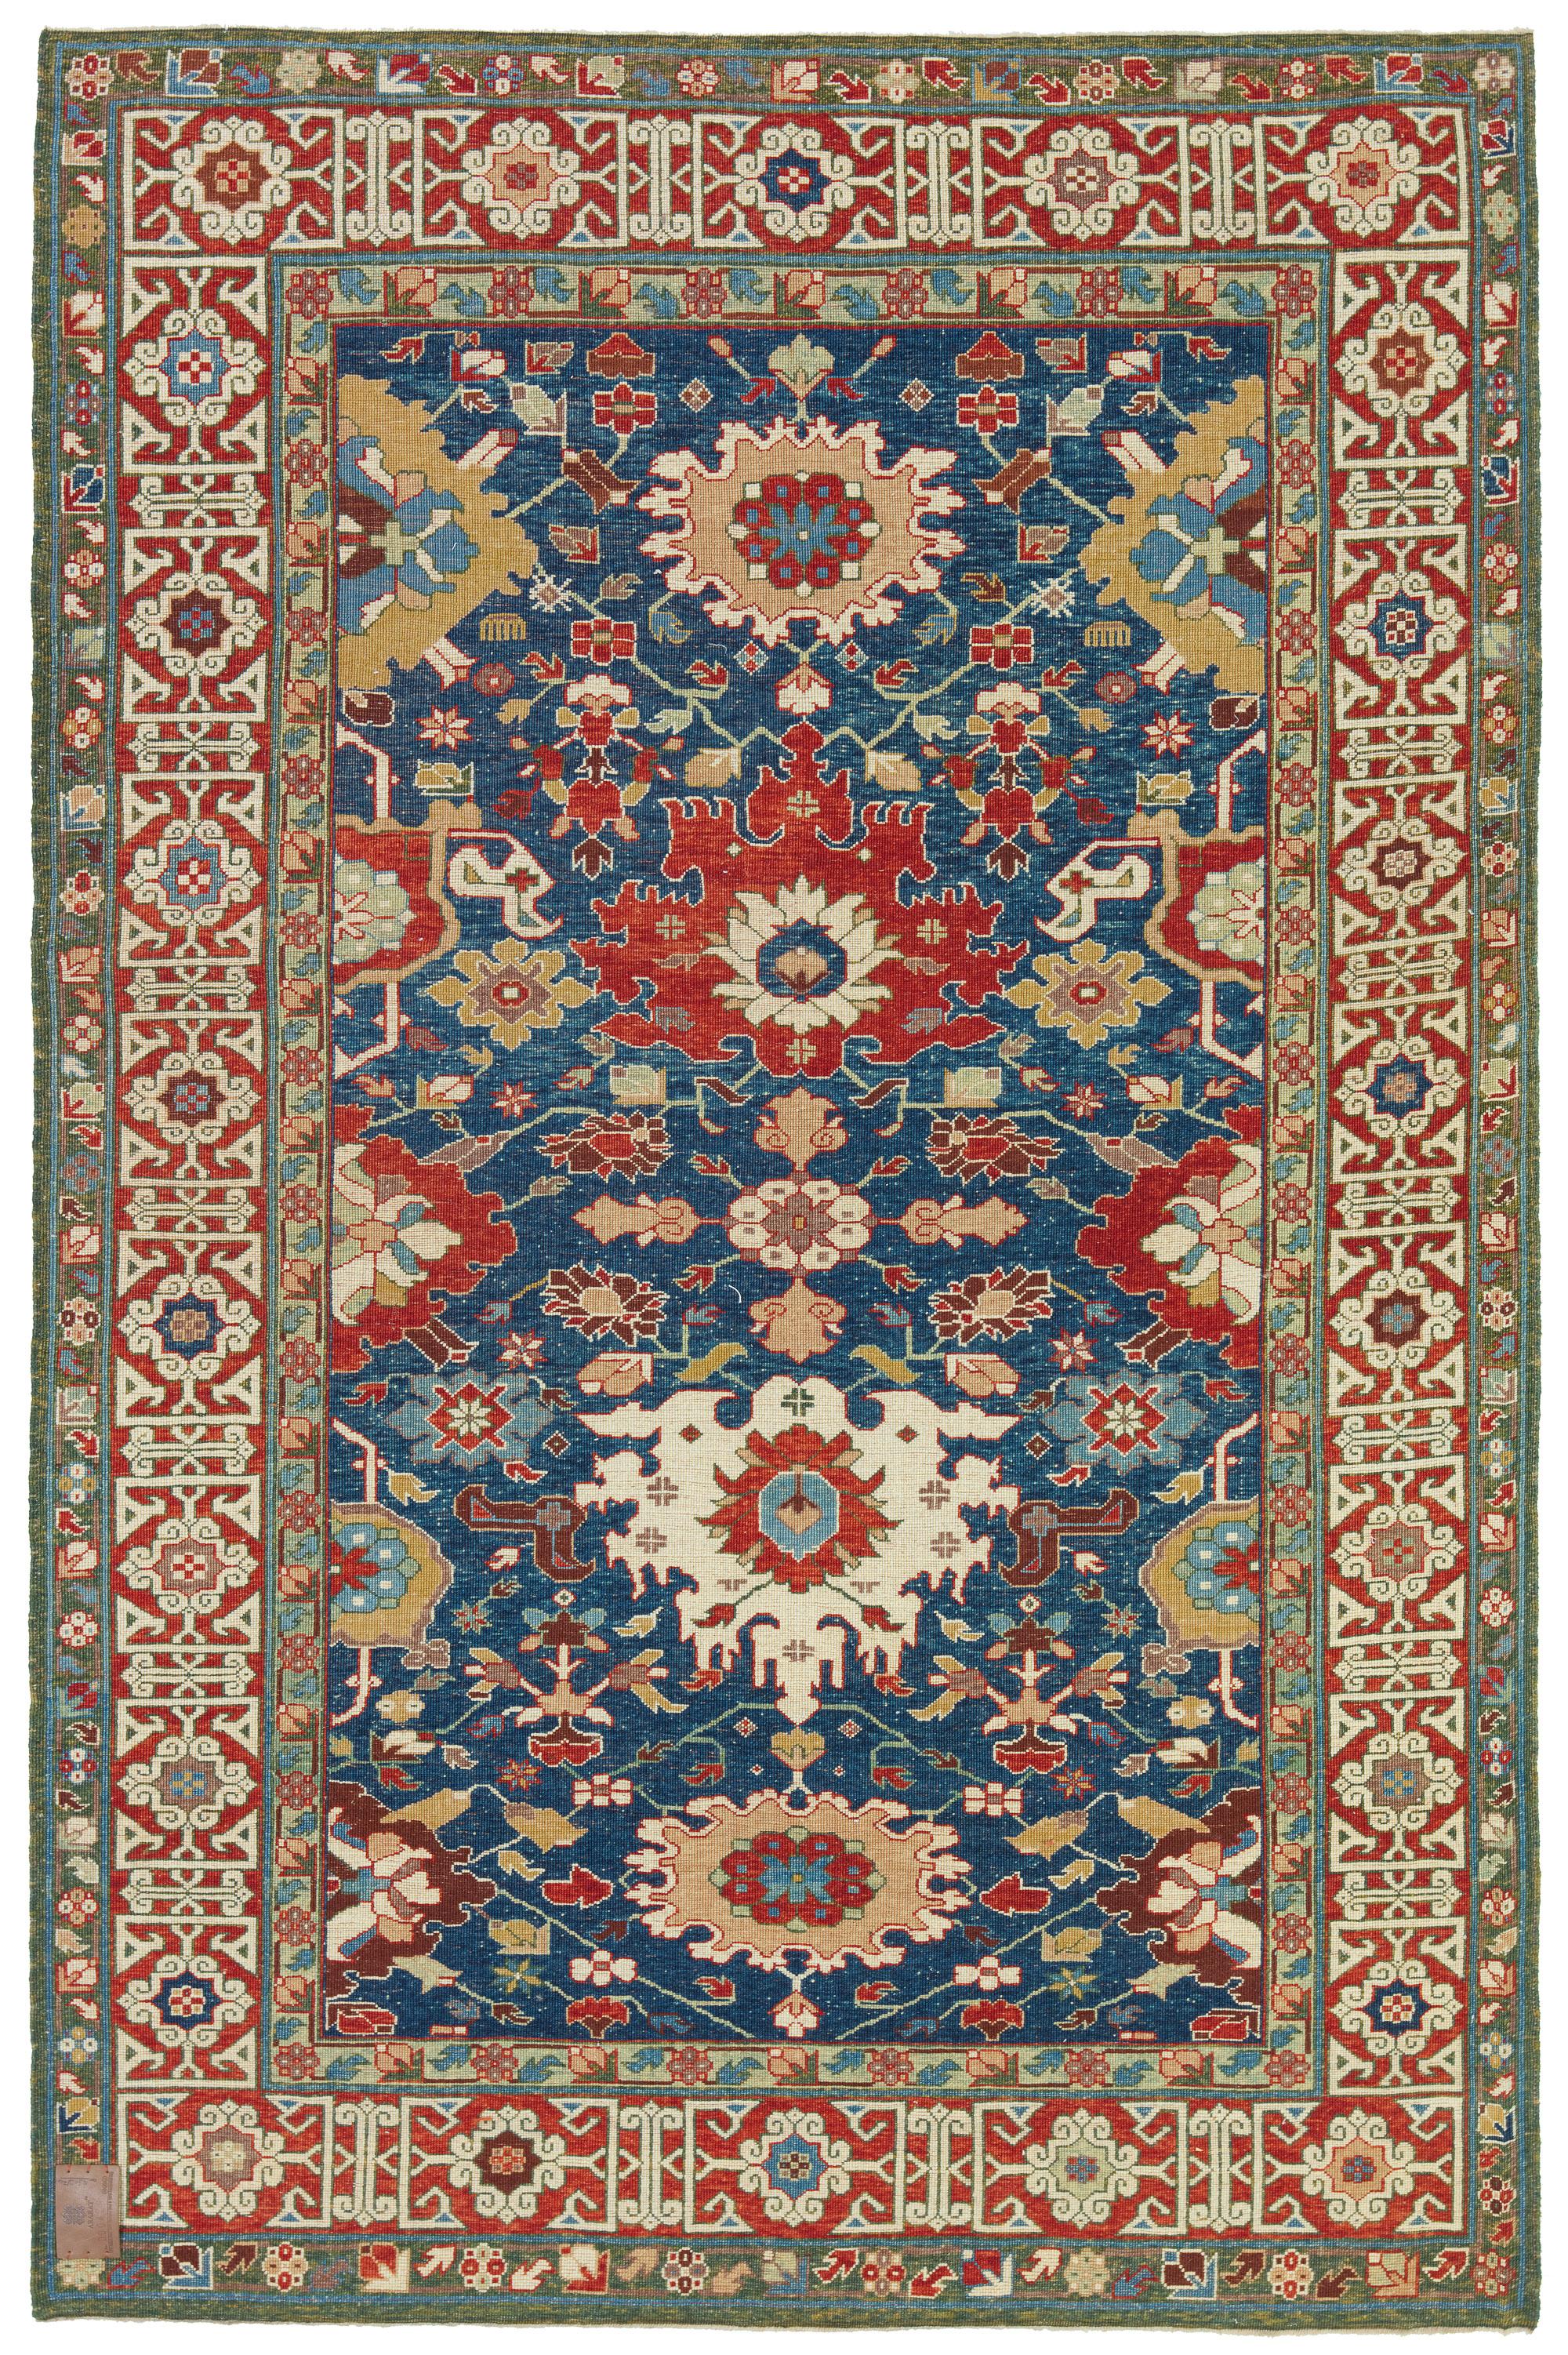 The source of the rug comes from the book Orient Star – A Carpet Collection, E. Heinrich Kirchheim, Hali Publications Ltd, 1993 nr.79. This is an unusual design of 18th or 19th-century rug from Khila, Kuba region East Caucasus area. Very similar